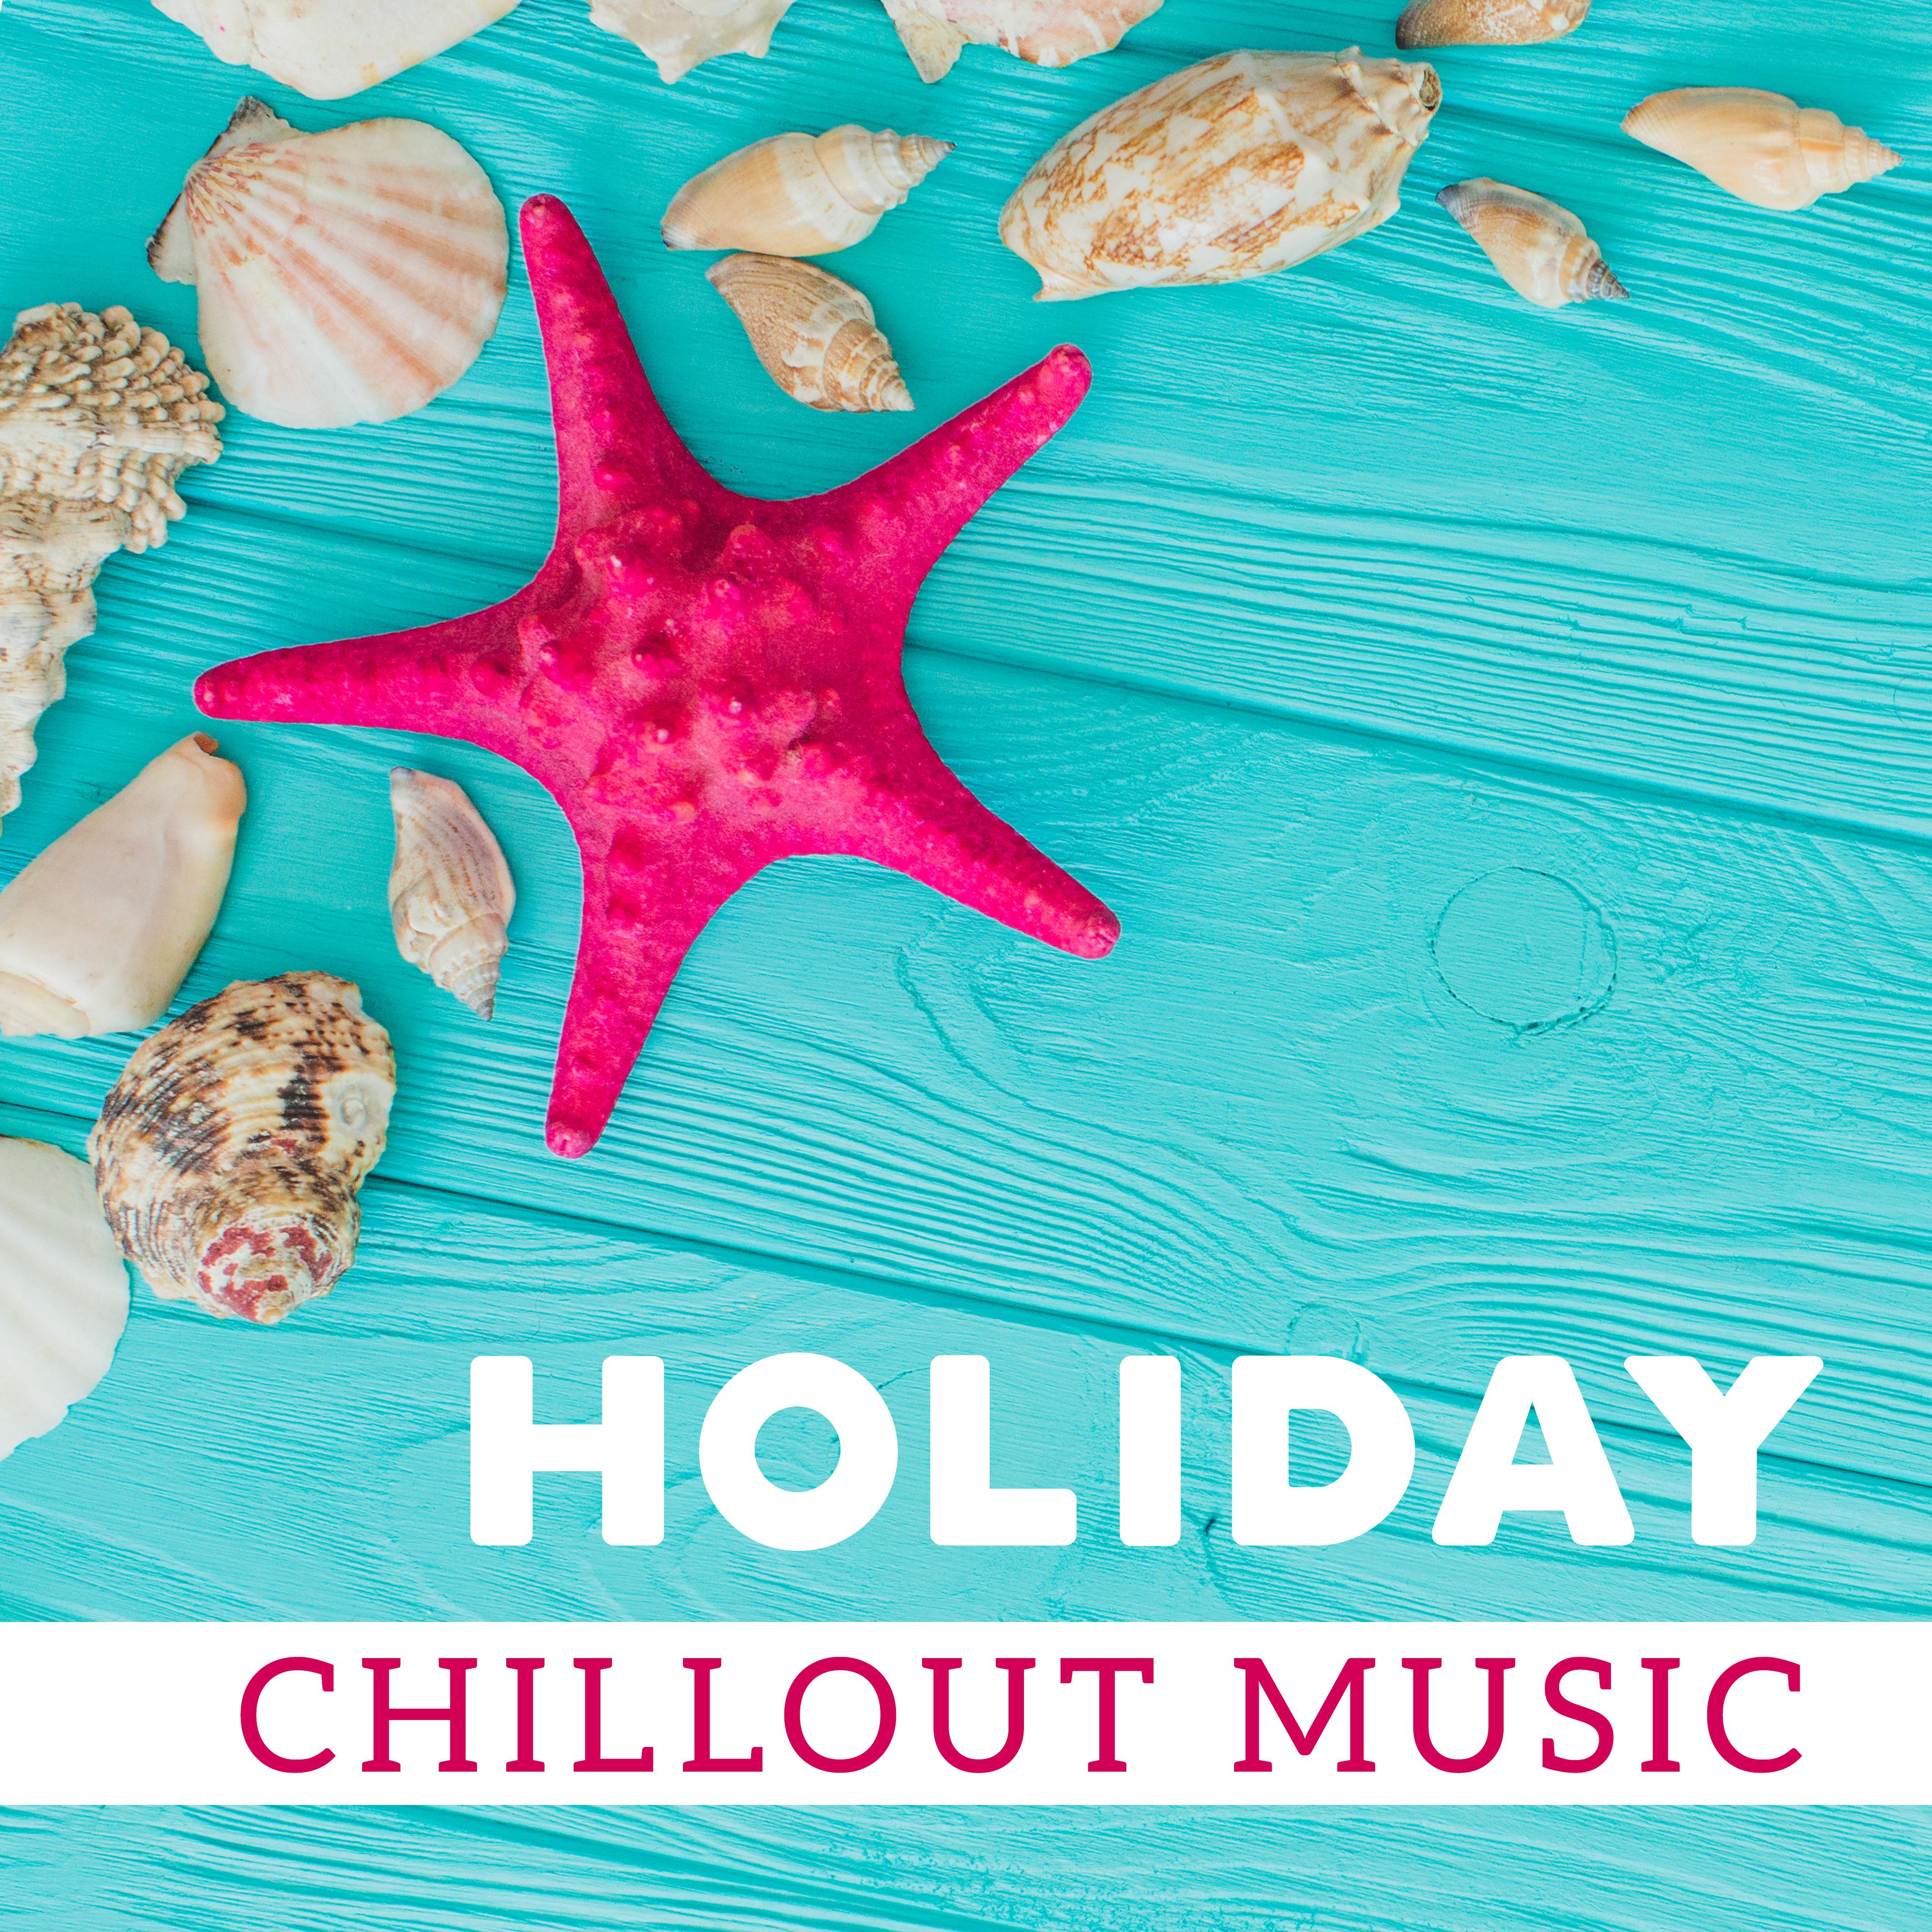 Holiday Chillout Music